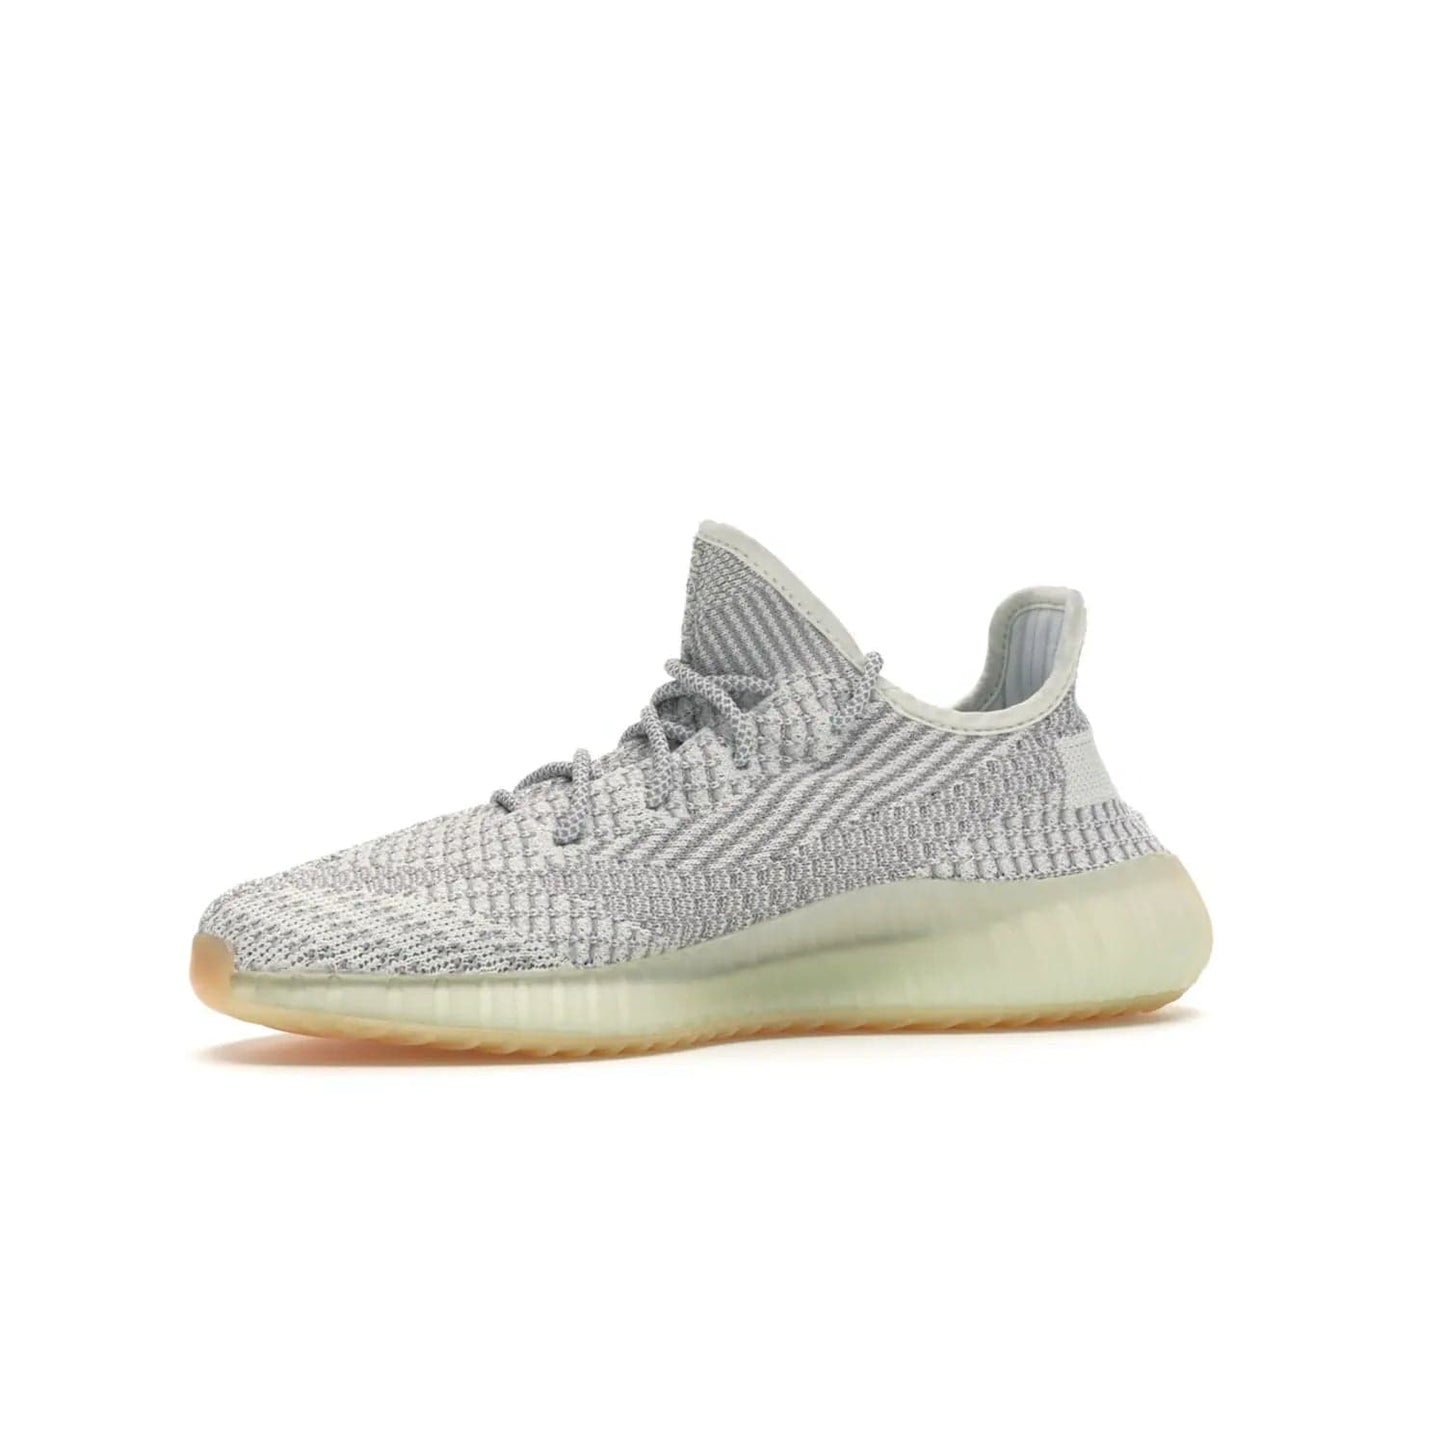 adidas Yeezy Boost 350 V2 Yeshaya (Non-Reflective) - Image 17 - Only at www.BallersClubKickz.com - Step out in style with the adidas Yeezy Boost 350 V2 Yeshaya (Non-Reflective). Gray-and-white Primeknit upper with mesh side stripe & rope laces, plus a translucent Boost sole with a hint of yellow. Make a statement and feel comfortable with this stylish sneaker.